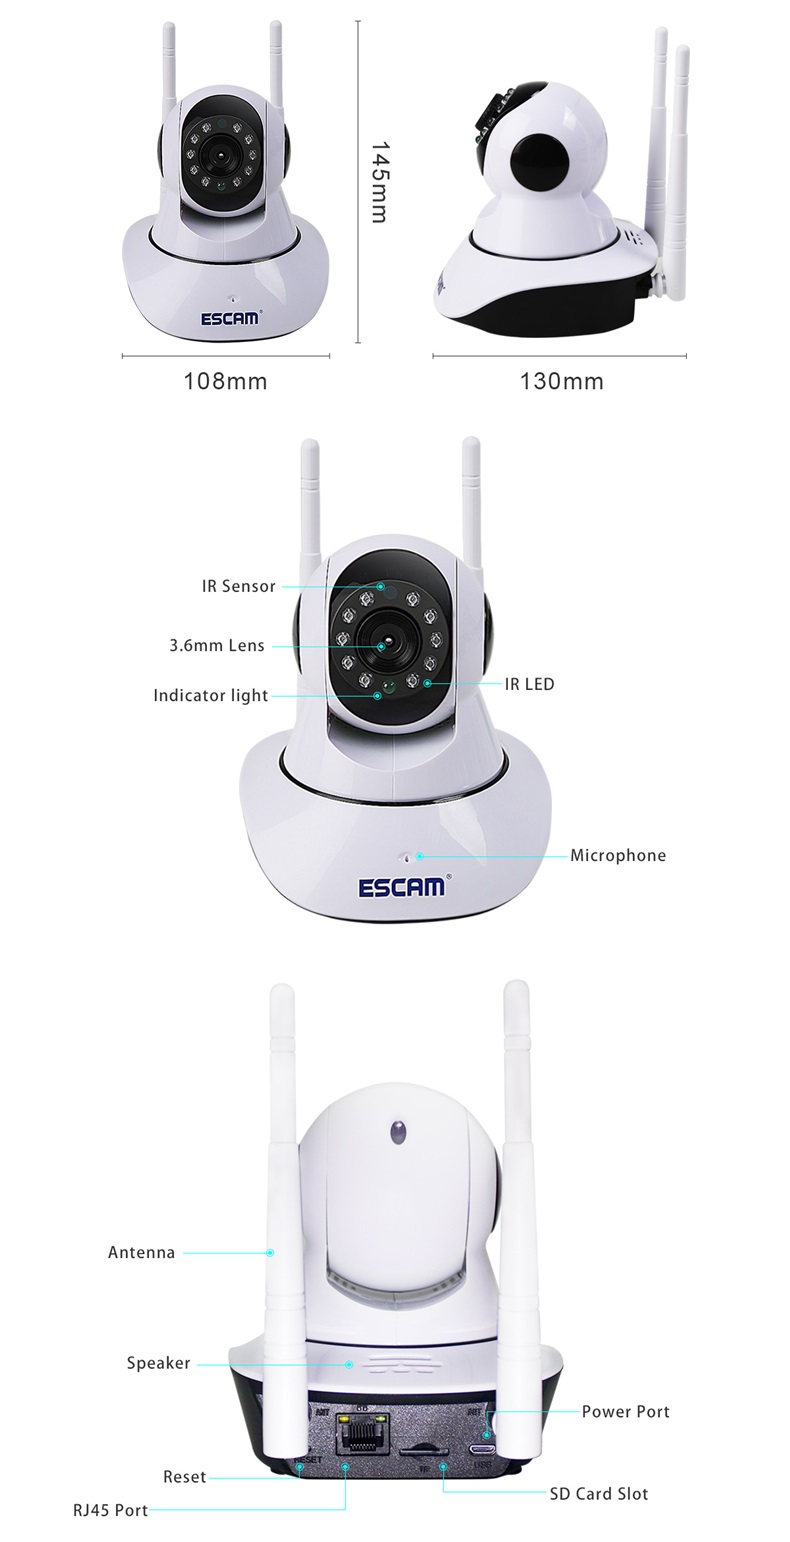 ESCAM G02 Dual Antenna 720P Pan/Tilt WiFi IP IR Camera Support ONVIF Max Up to 128GB Video Monitor 64